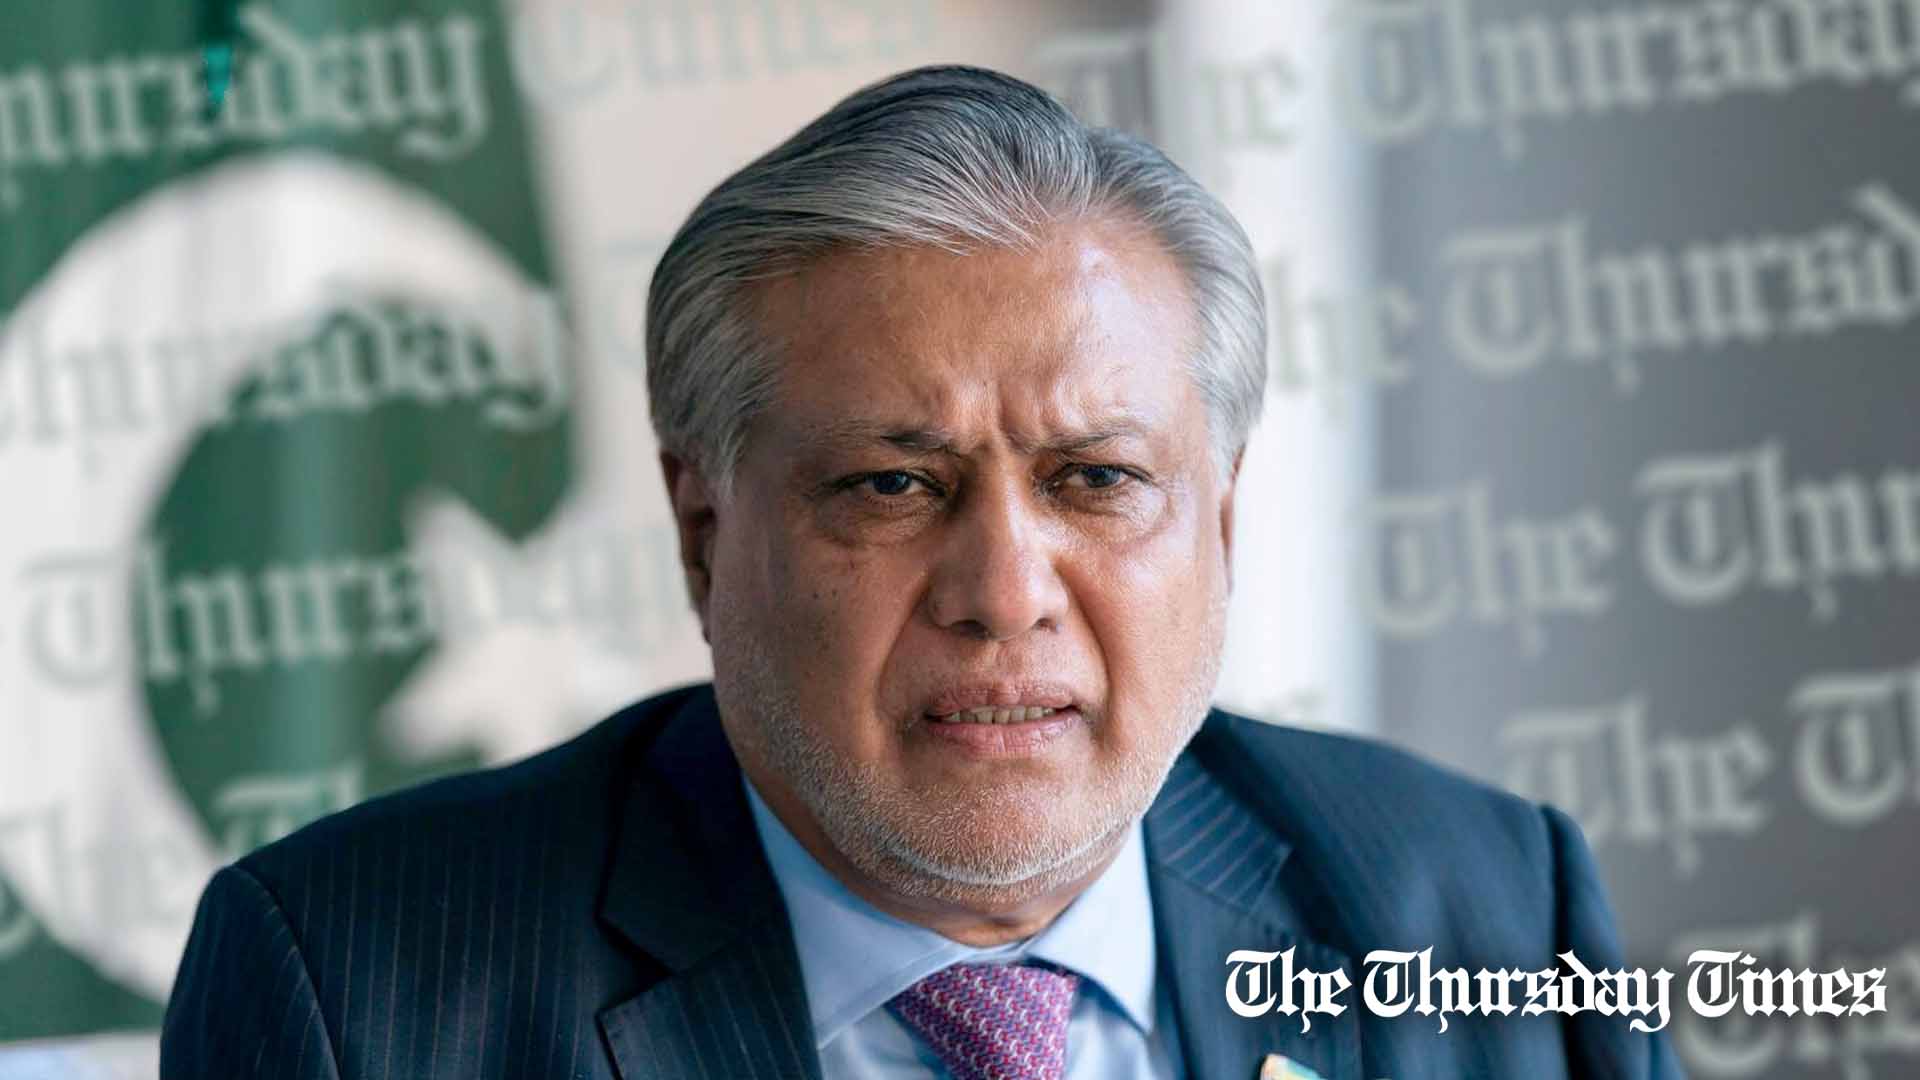 Finance Minister Ishaq Dar is shown at Washington, D.C. in 2022. — AP/FILE/THE THURSDAY TIMES